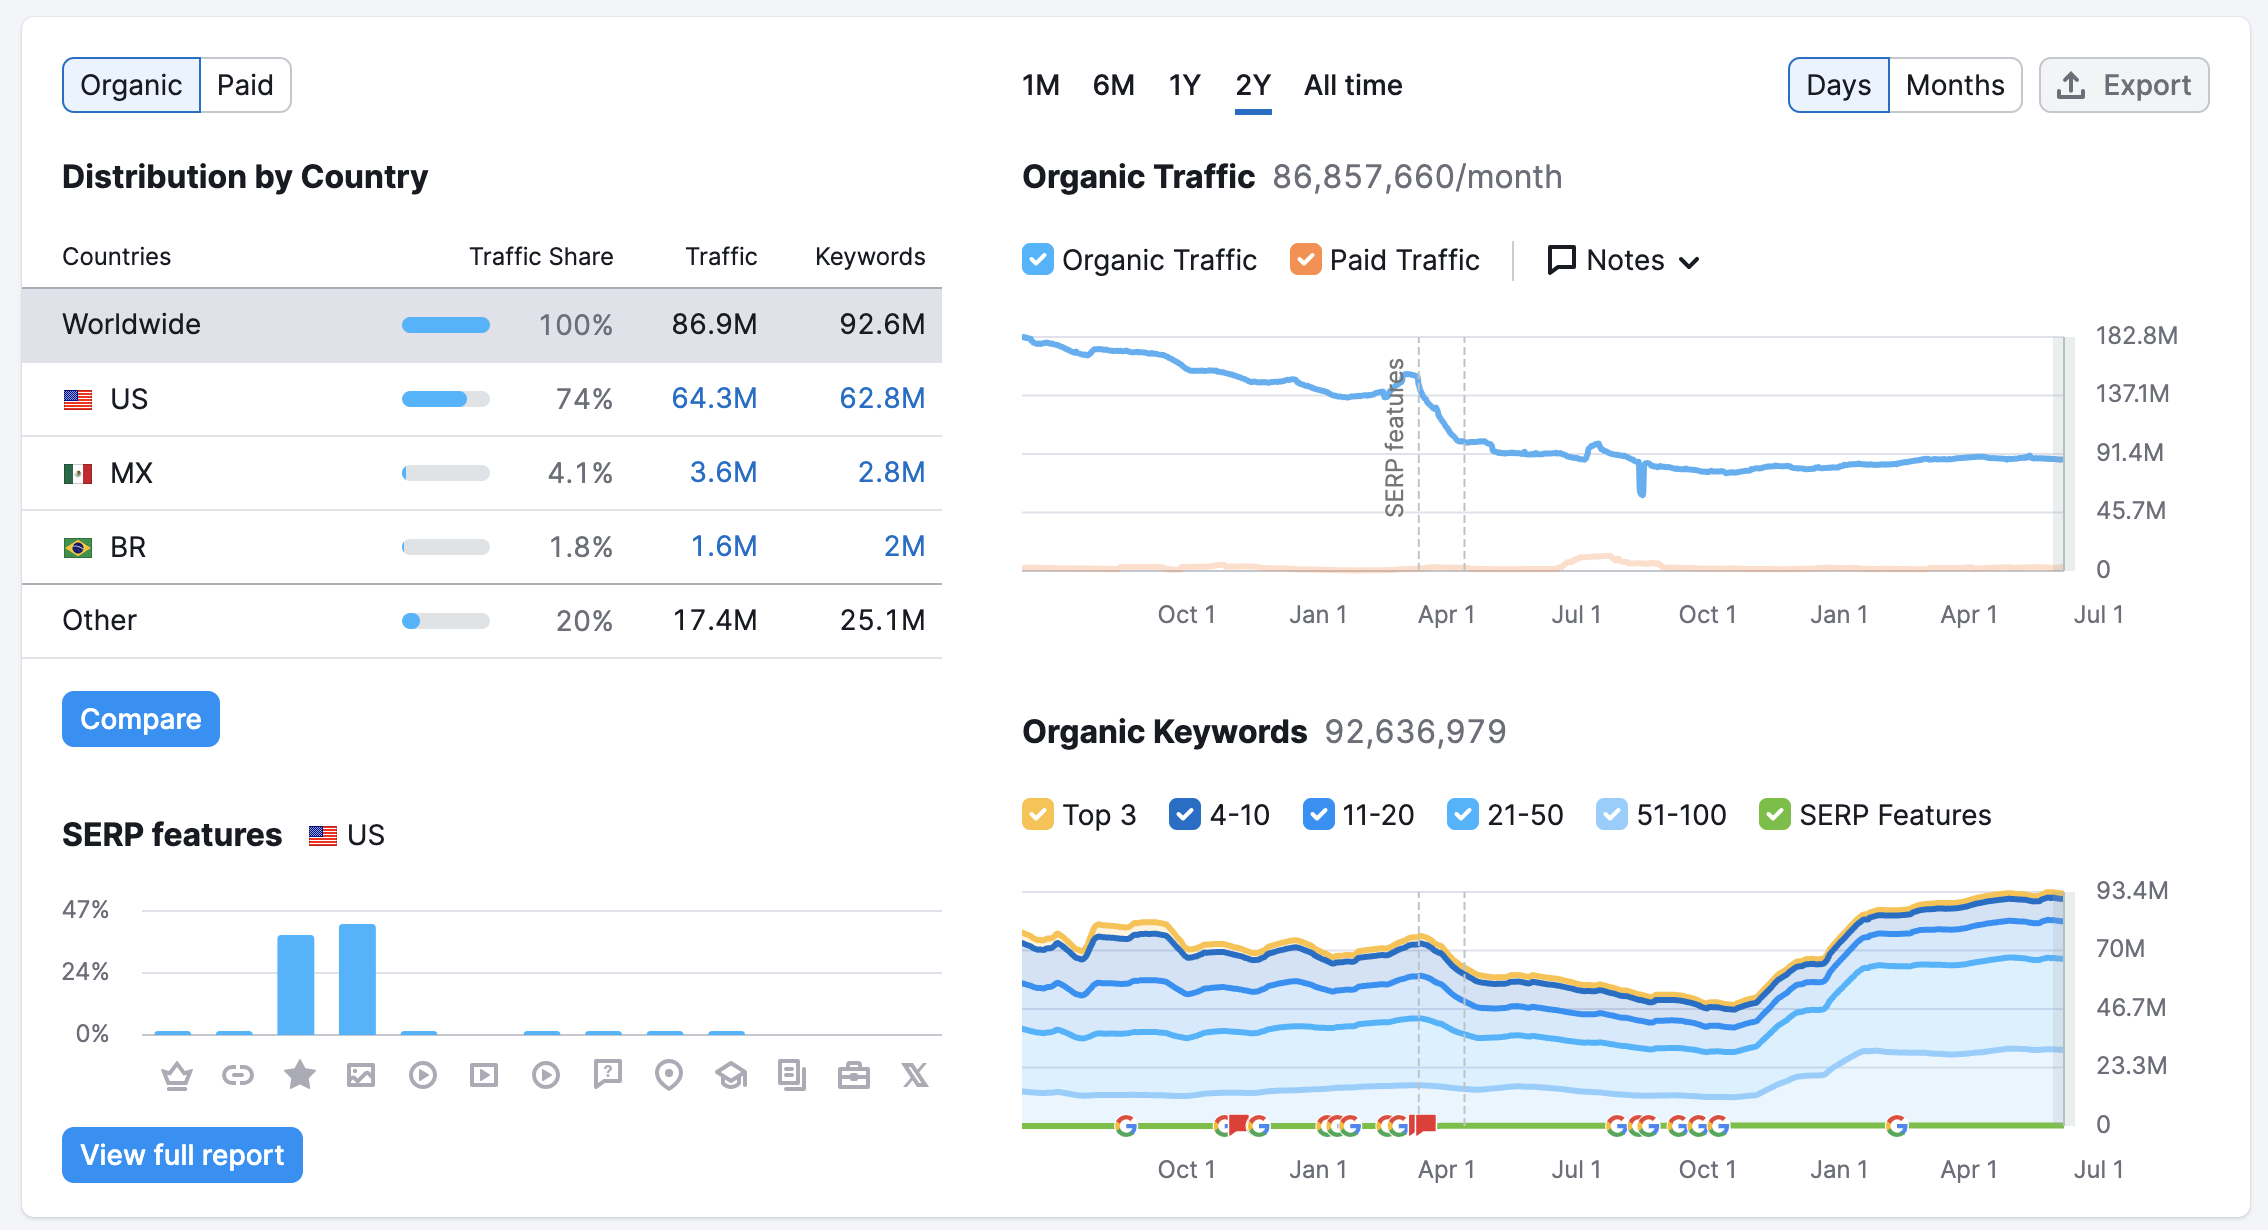 An example of four widgets: Distribution by Country, SERP features, Organic Keywords, and Organic Traffic.